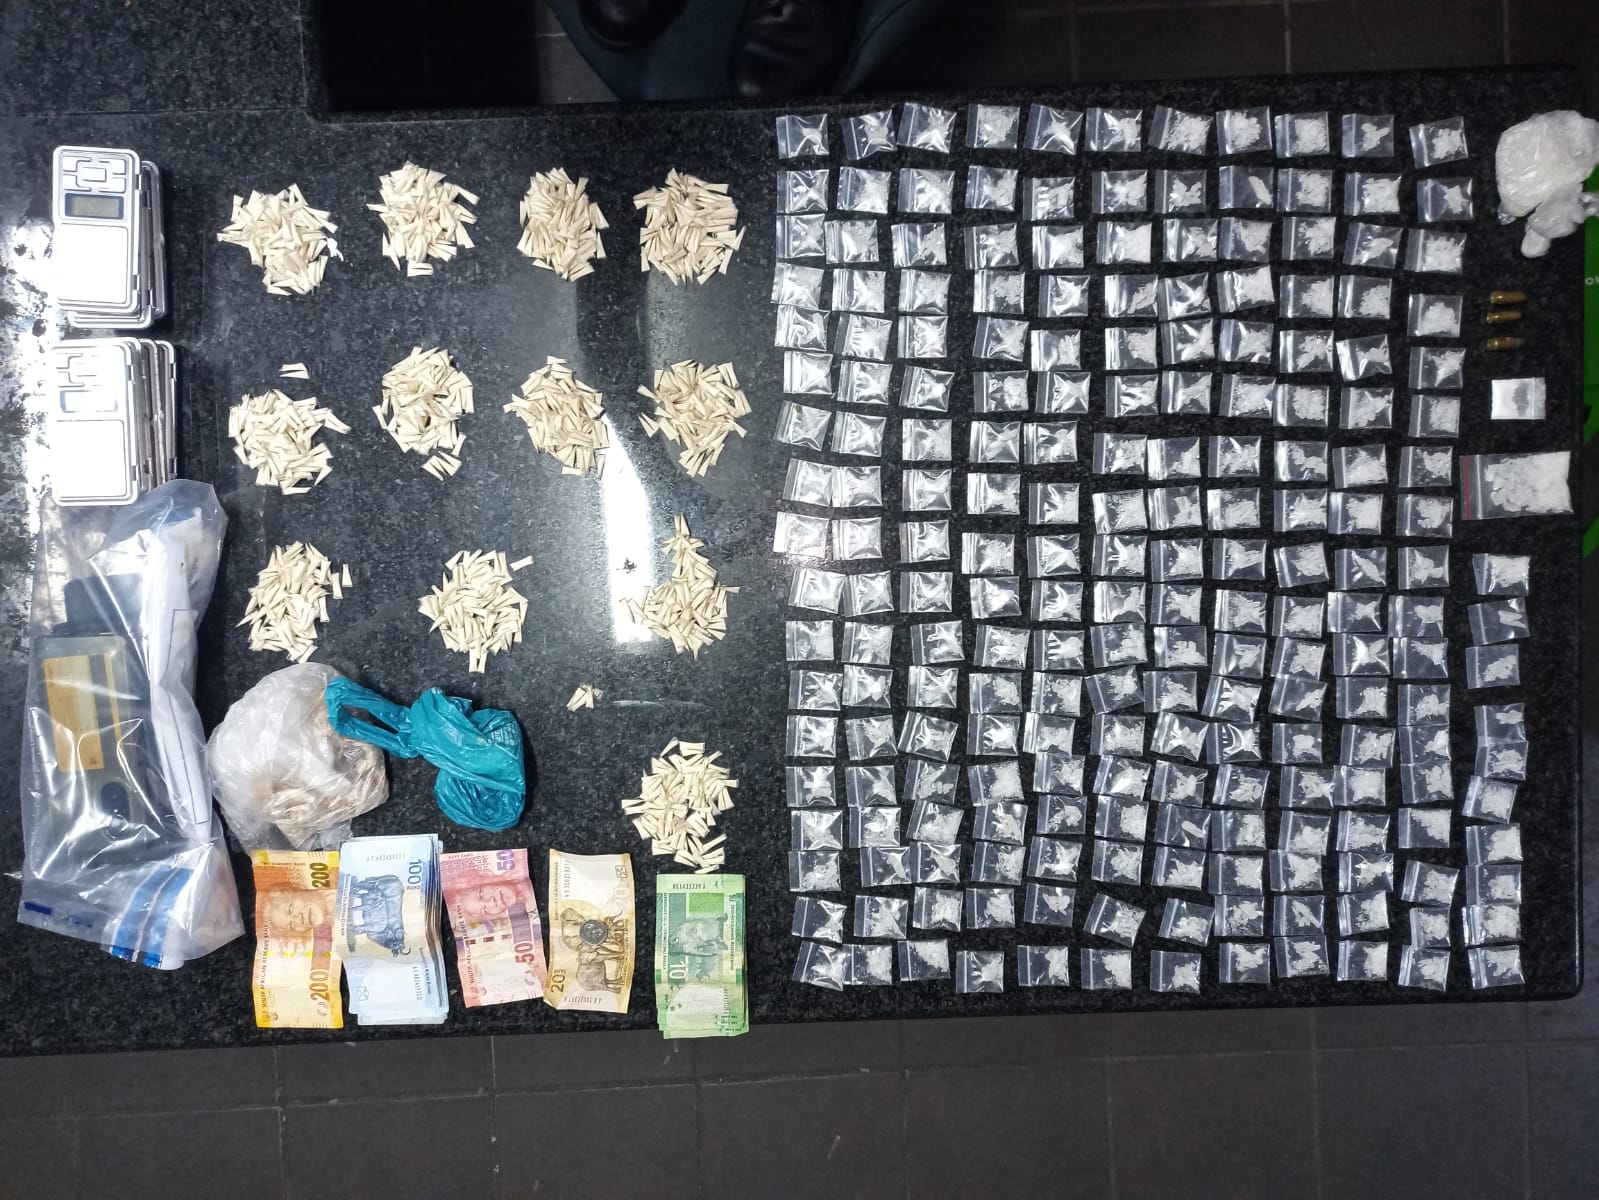 Police members recover a consignment of drugs and cash